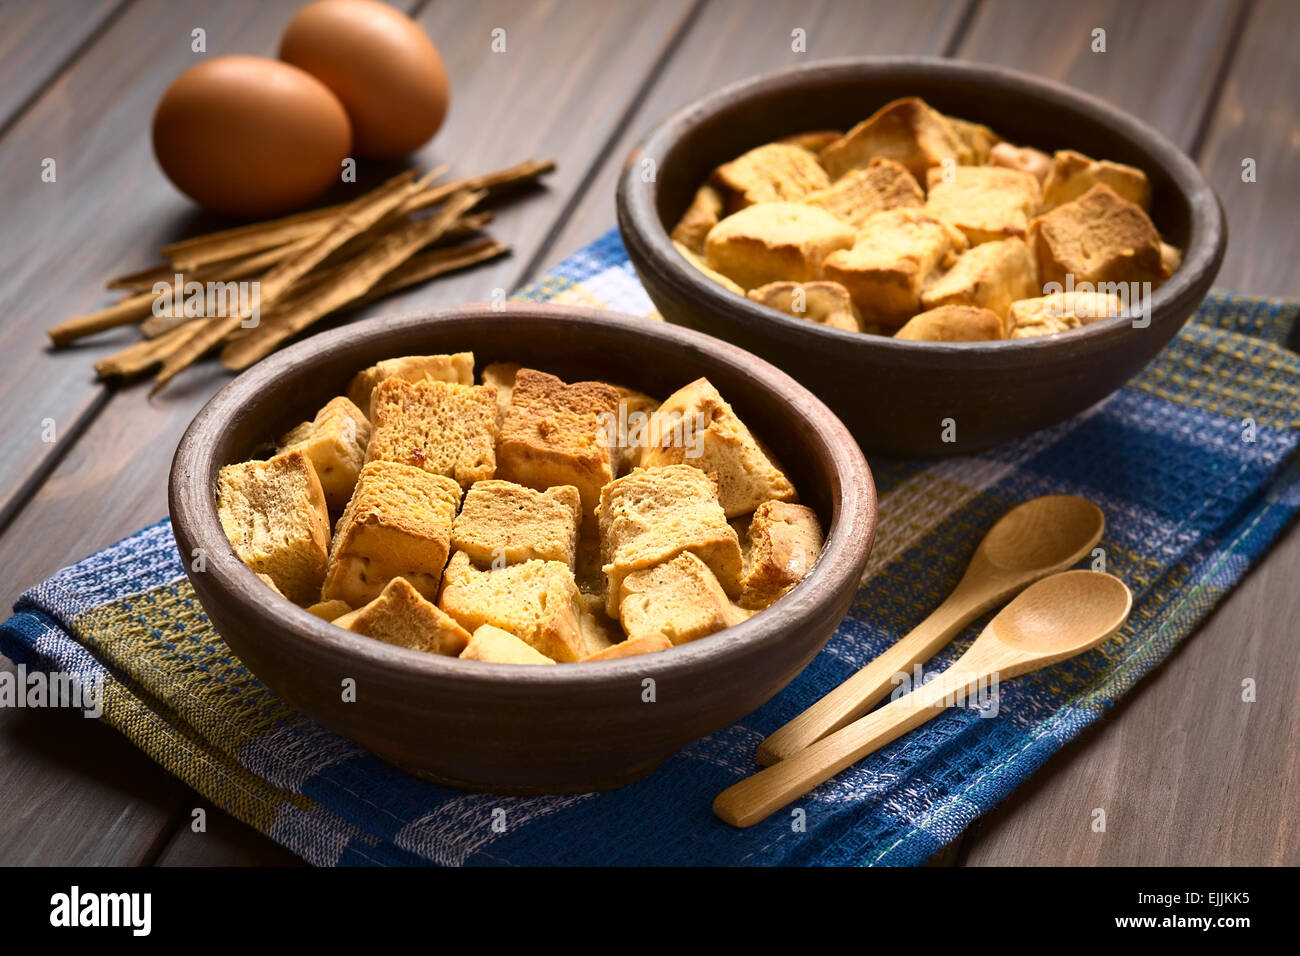 Two rustic bowls of bread pudding made of diced stale bread, milk, egg, cinnamon, sugar and butter Stock Photo